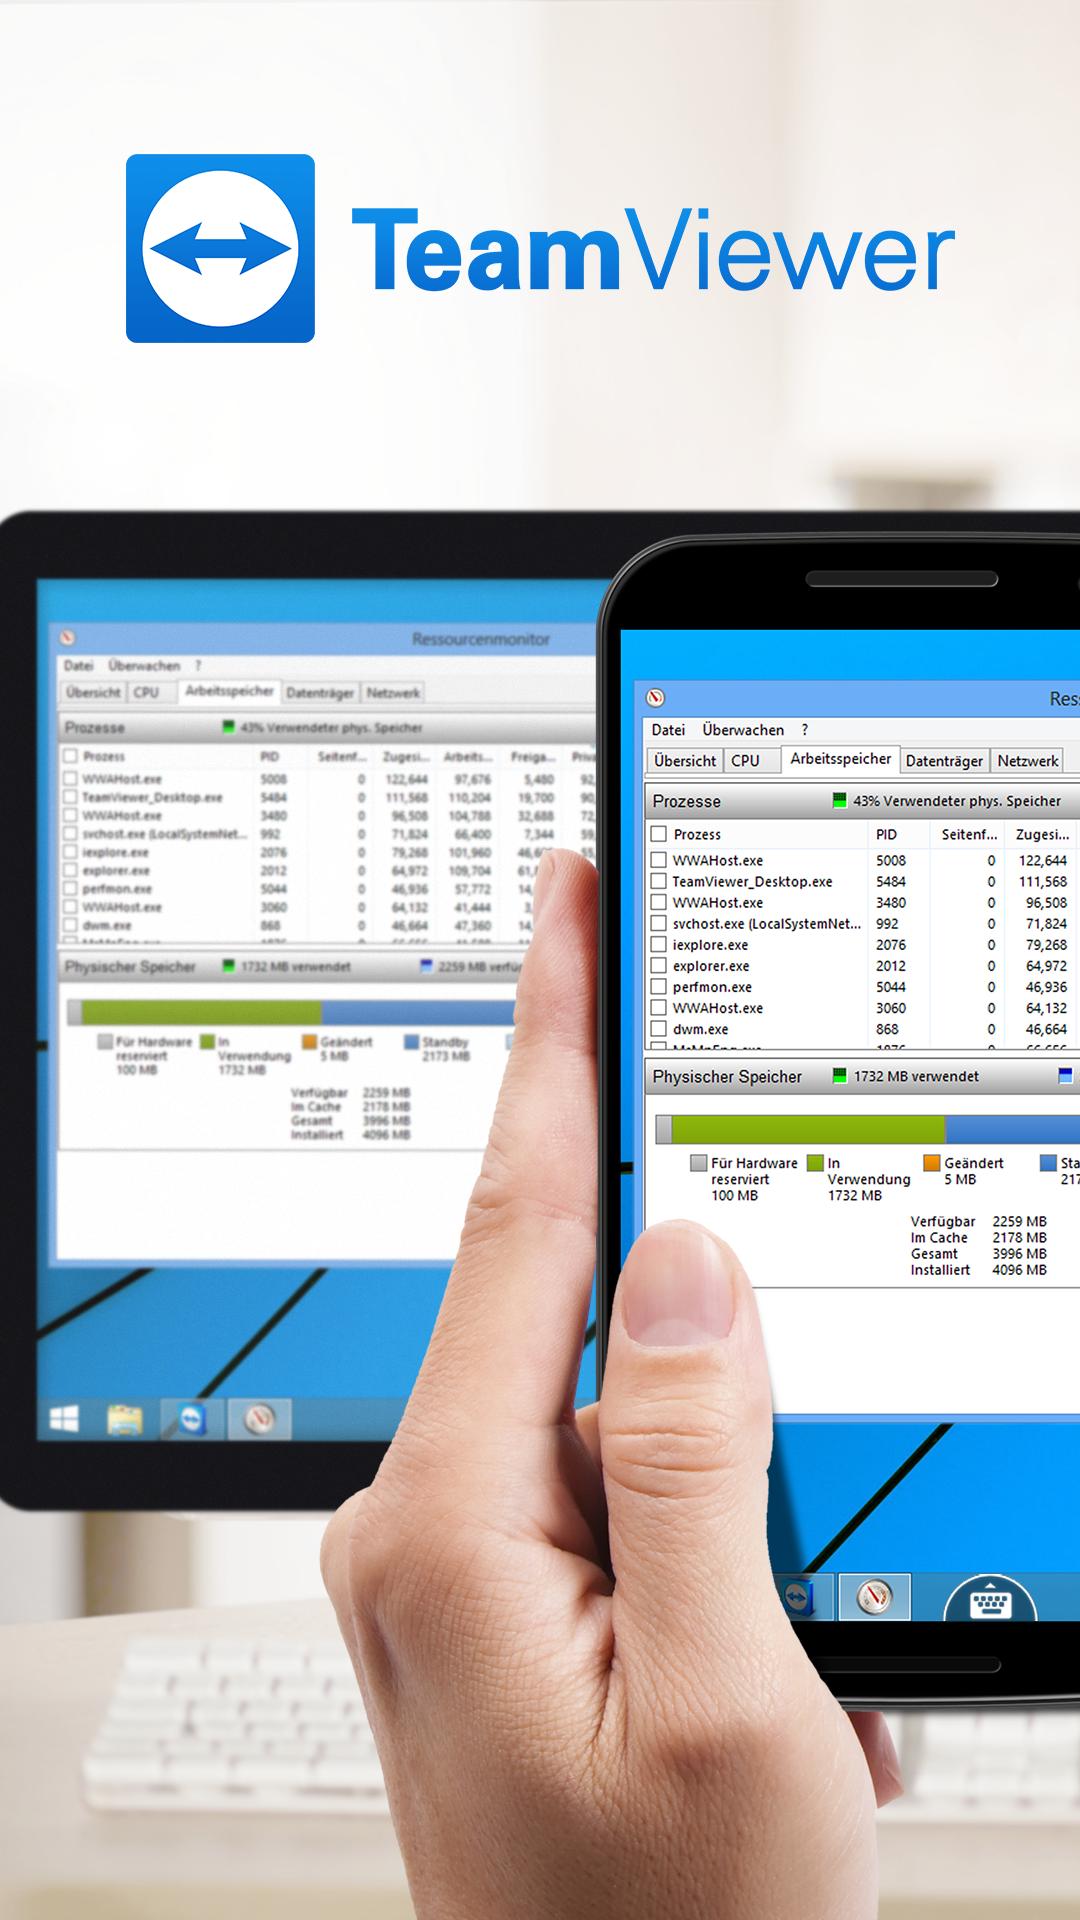 TeamViewer for Remote Control 15.12.12 Screenshot 1